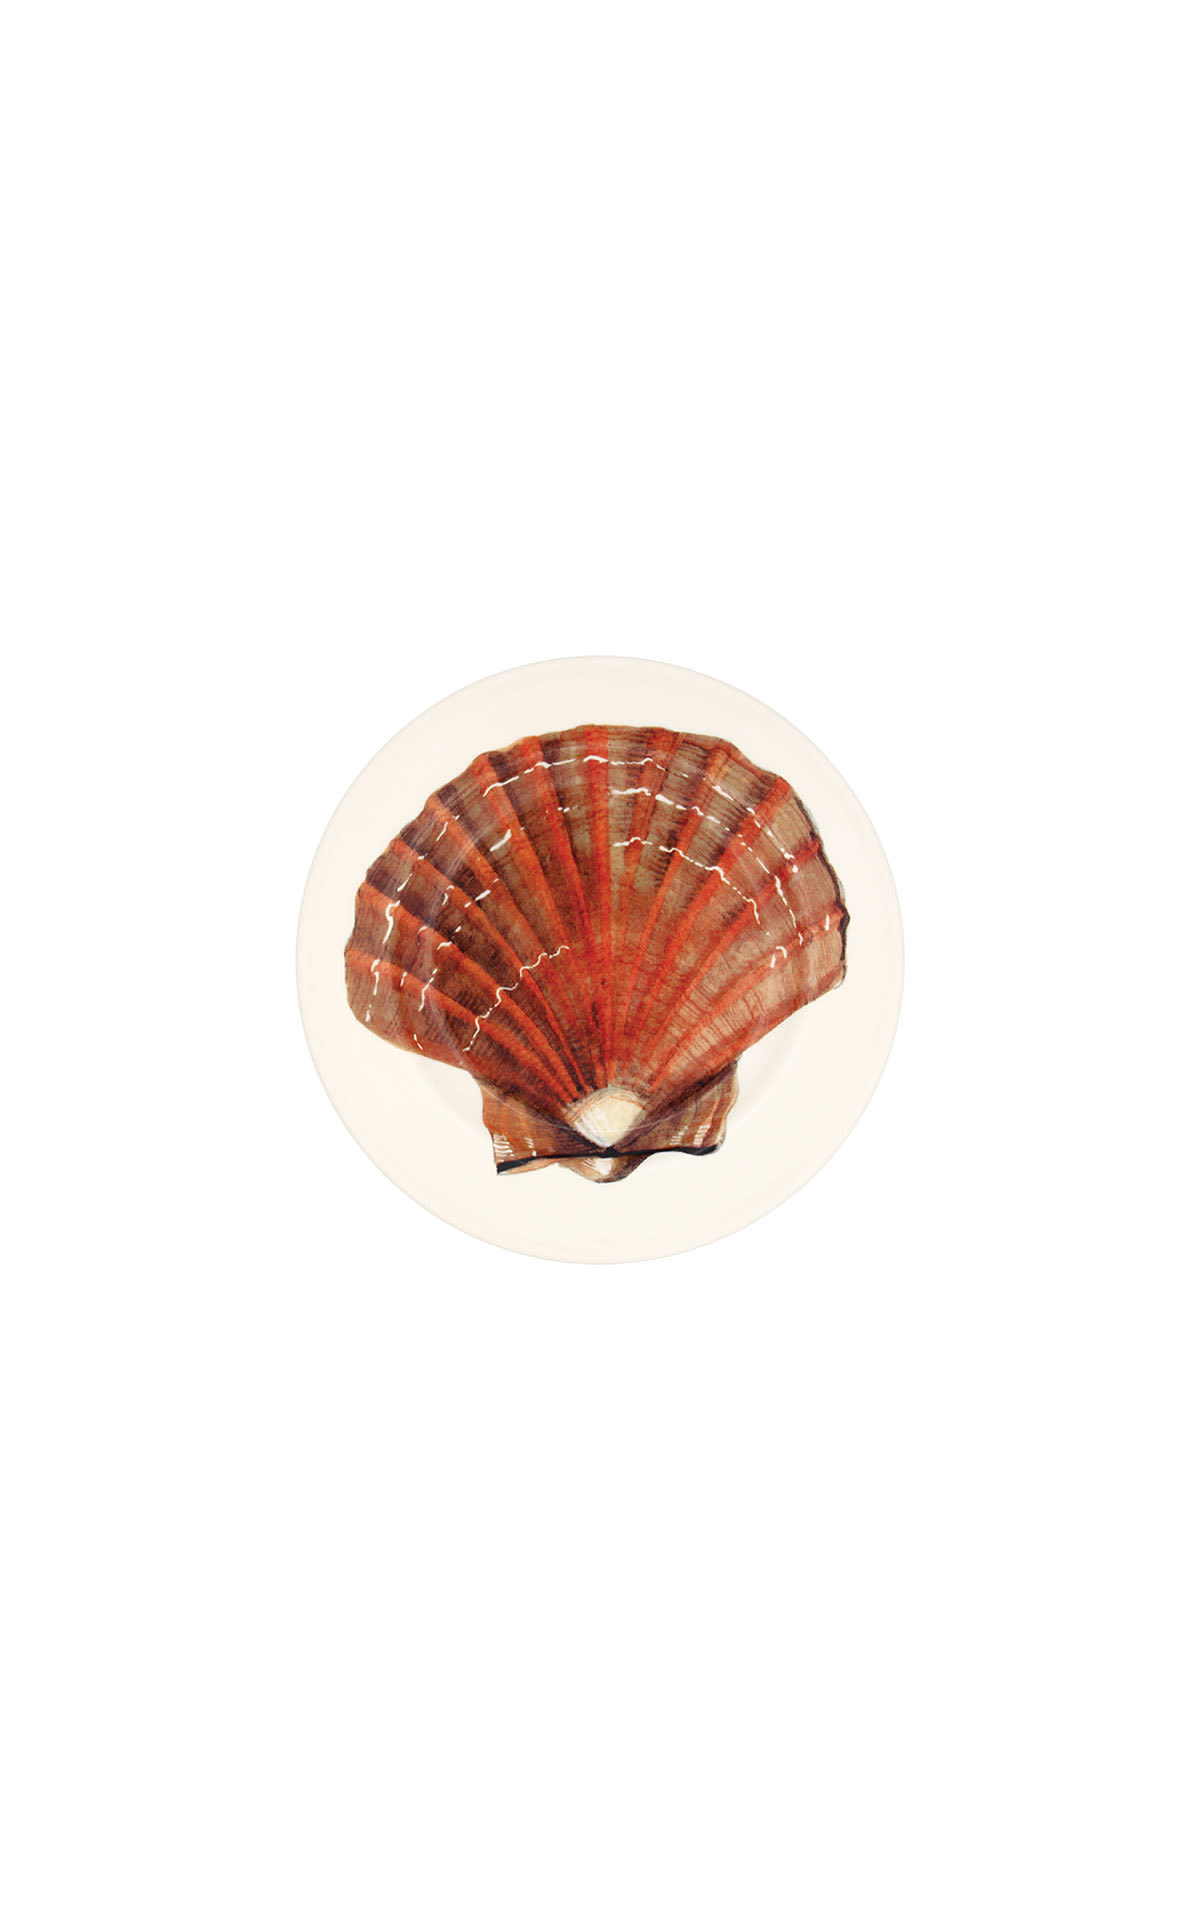 Emma Bridgewater Scallop shell plate from Bicester Village